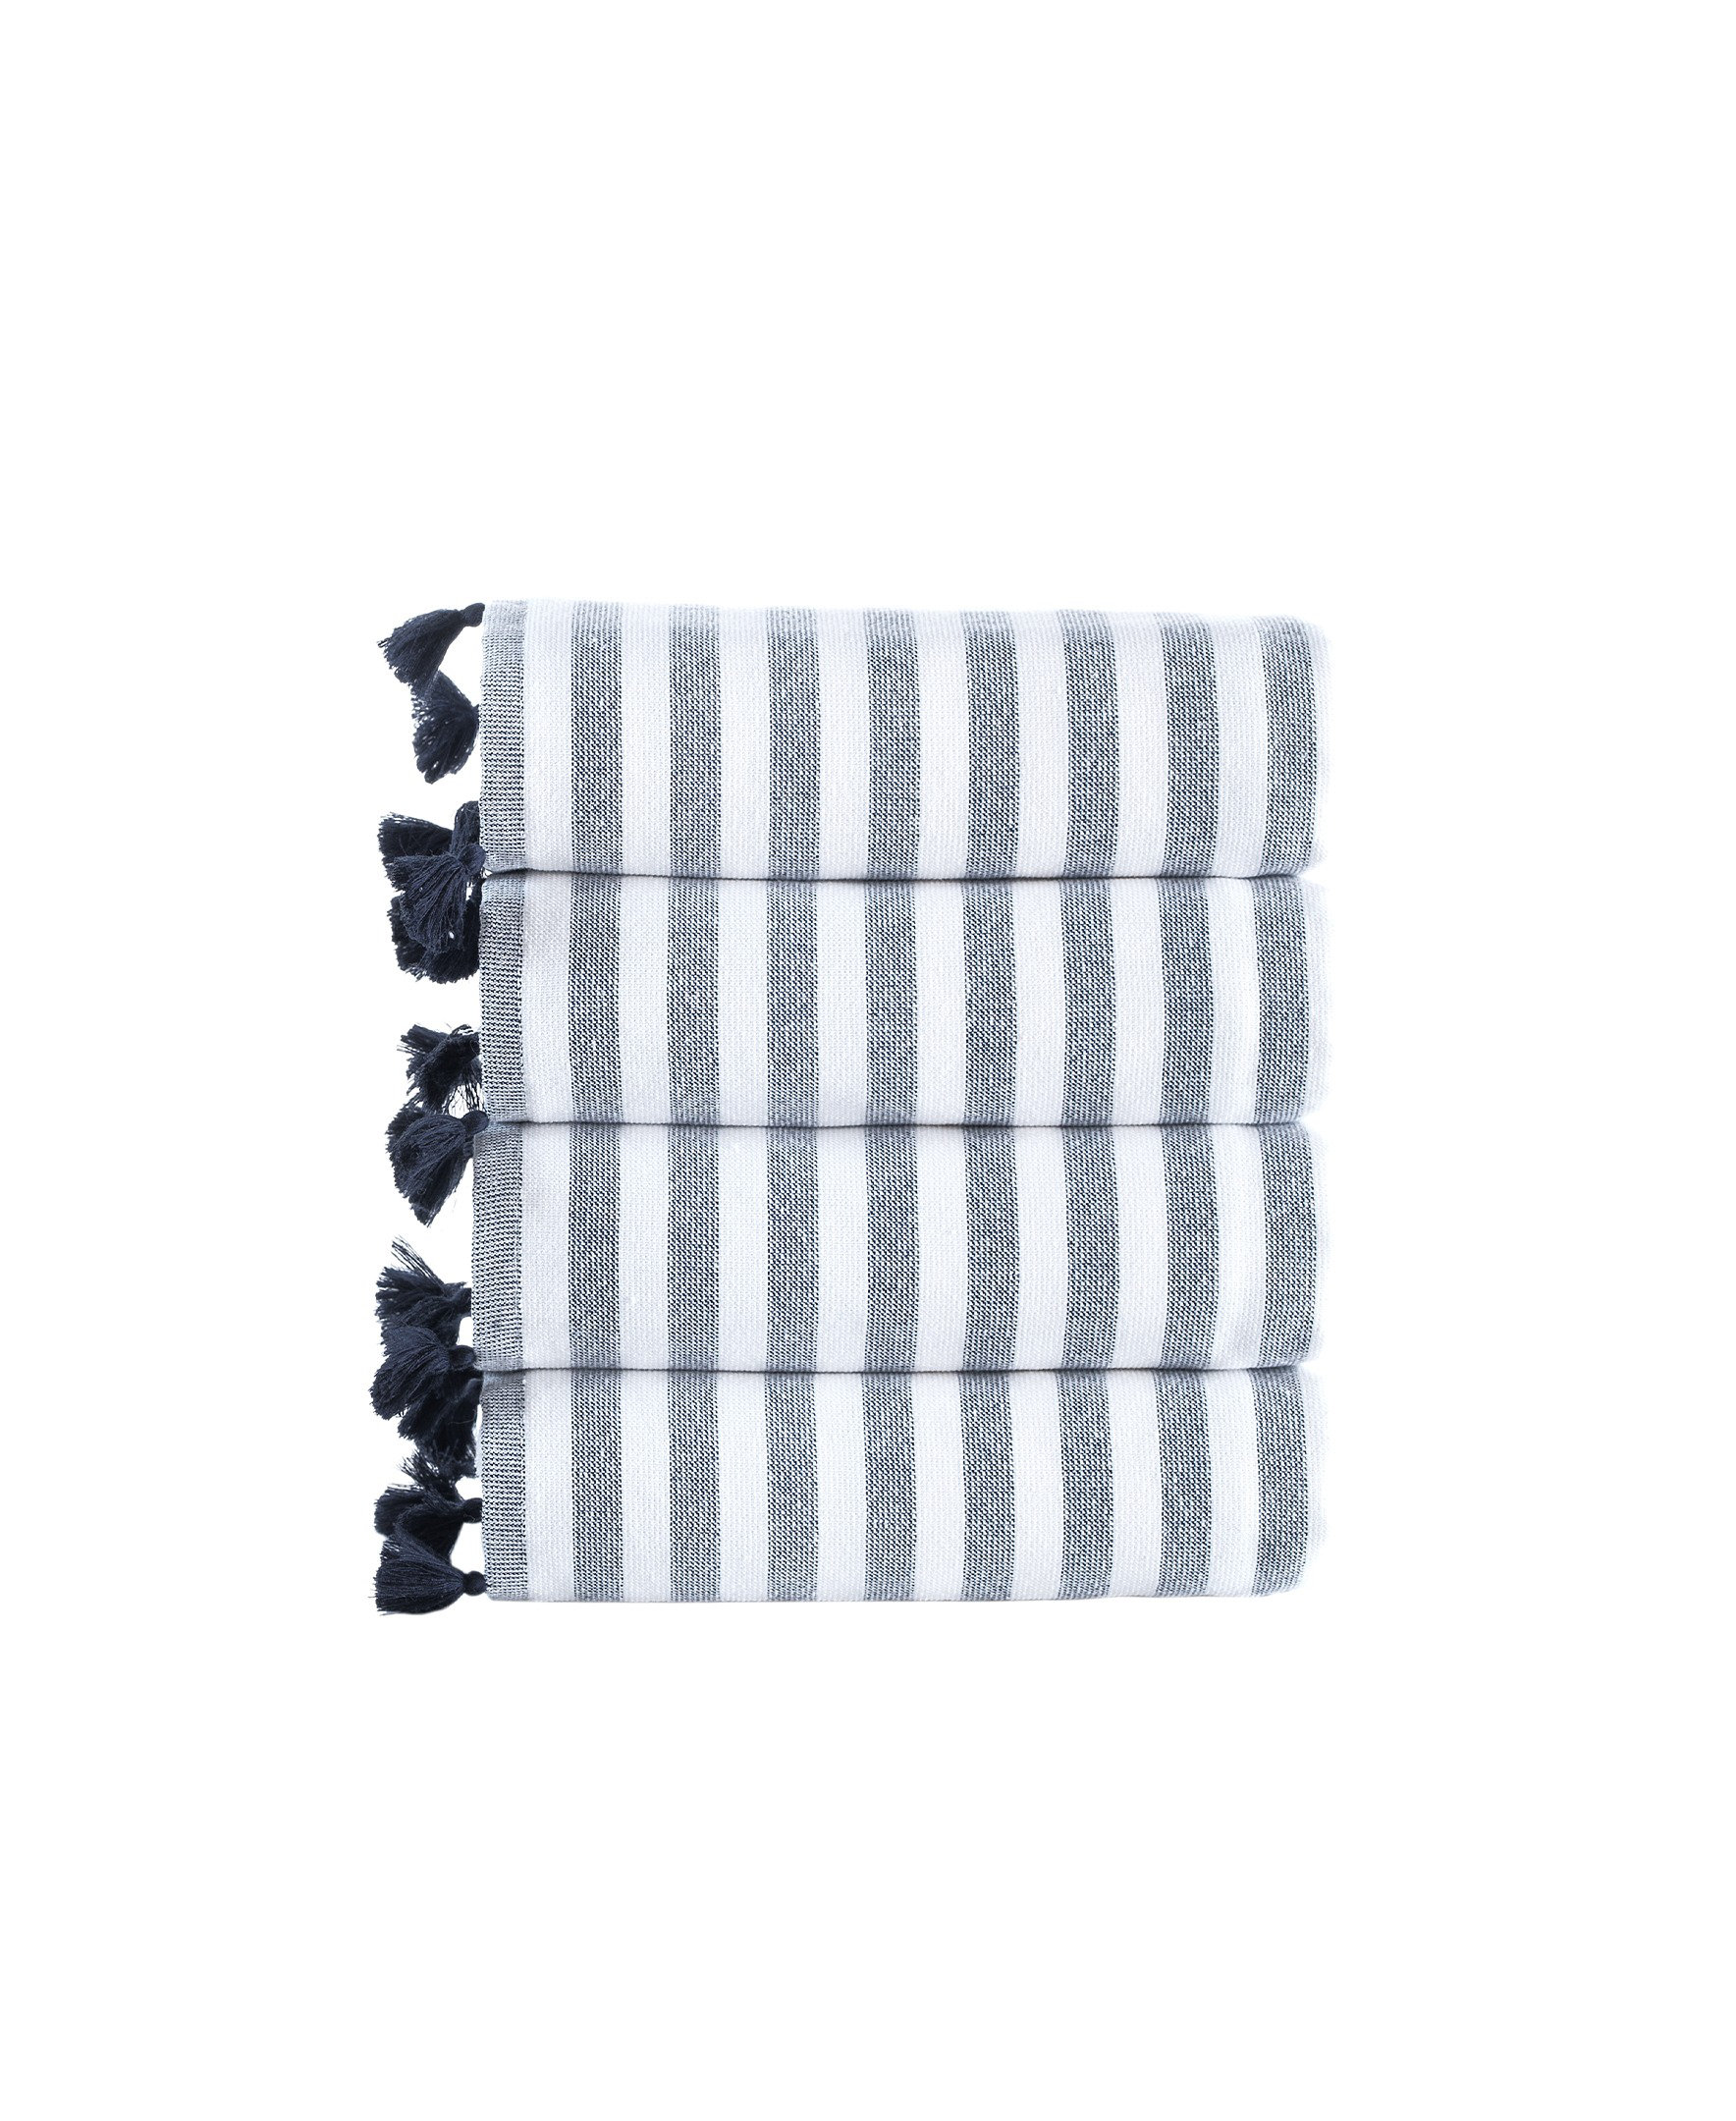 Cascata Turkish Cotton Hand Towels (Set of 6) Wade Logan Color: White